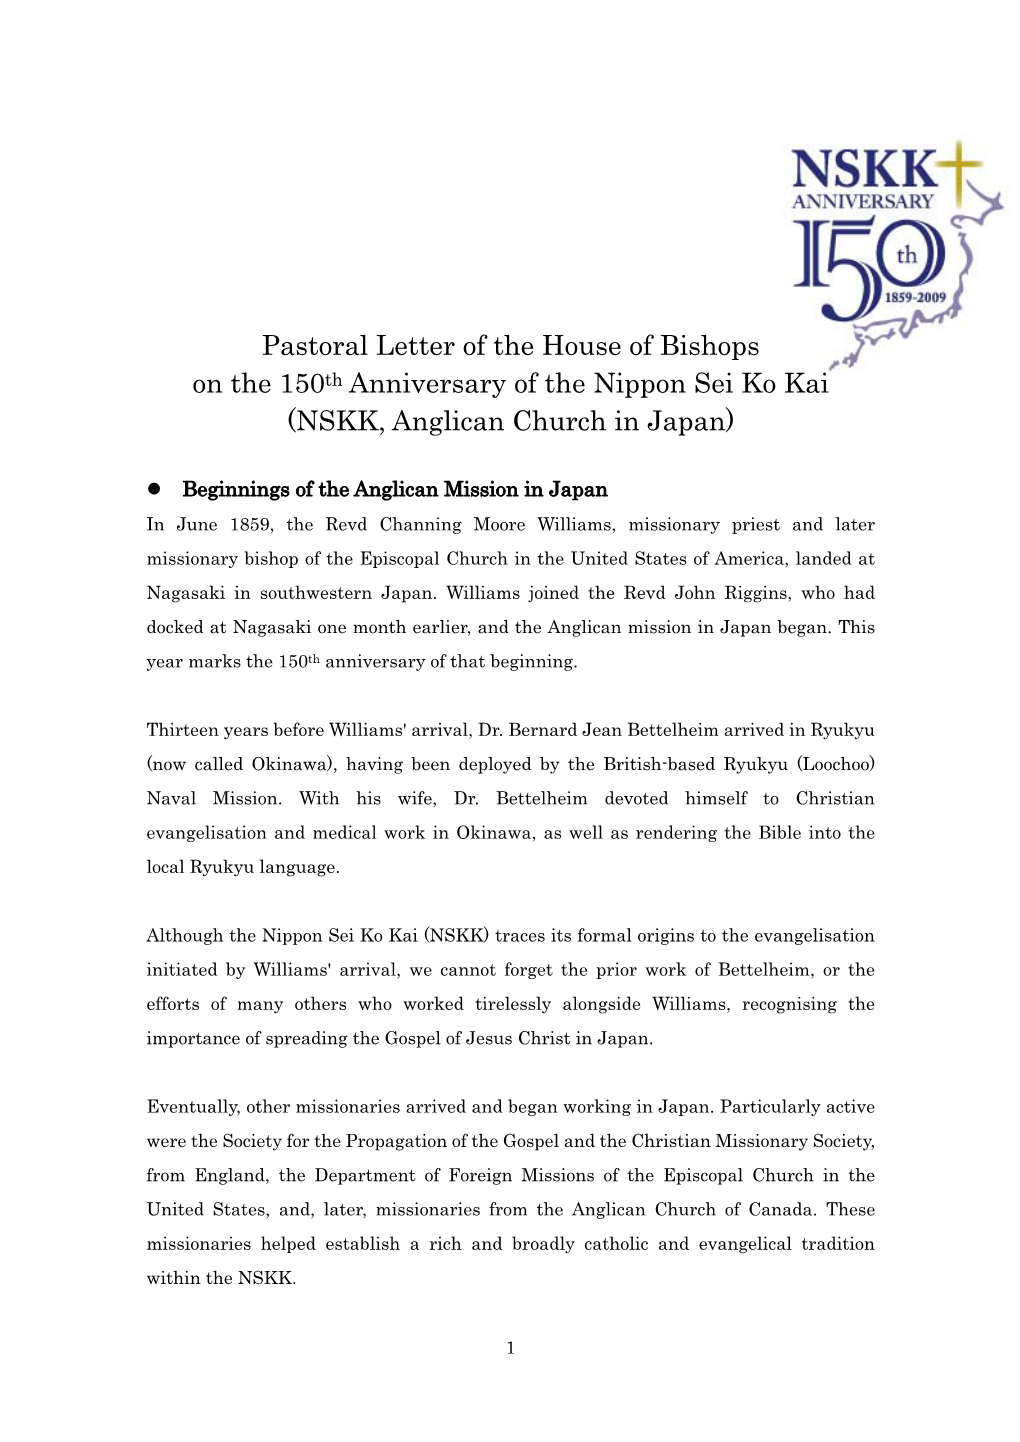 Pastoral Letter of the House of Bishops on The